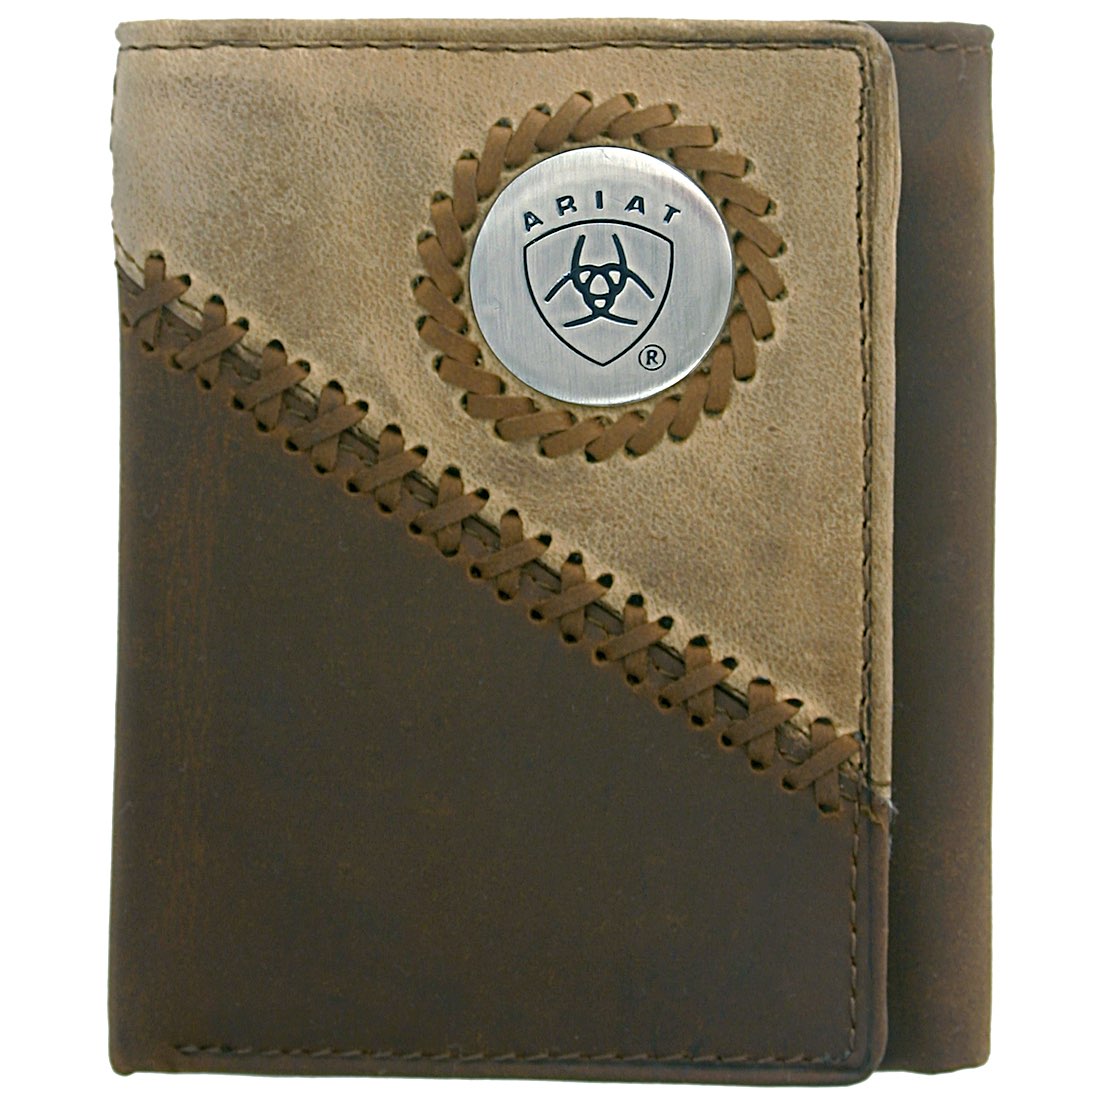 Ariat Tri fold Wallet - Brown/Fawn WLT3100A